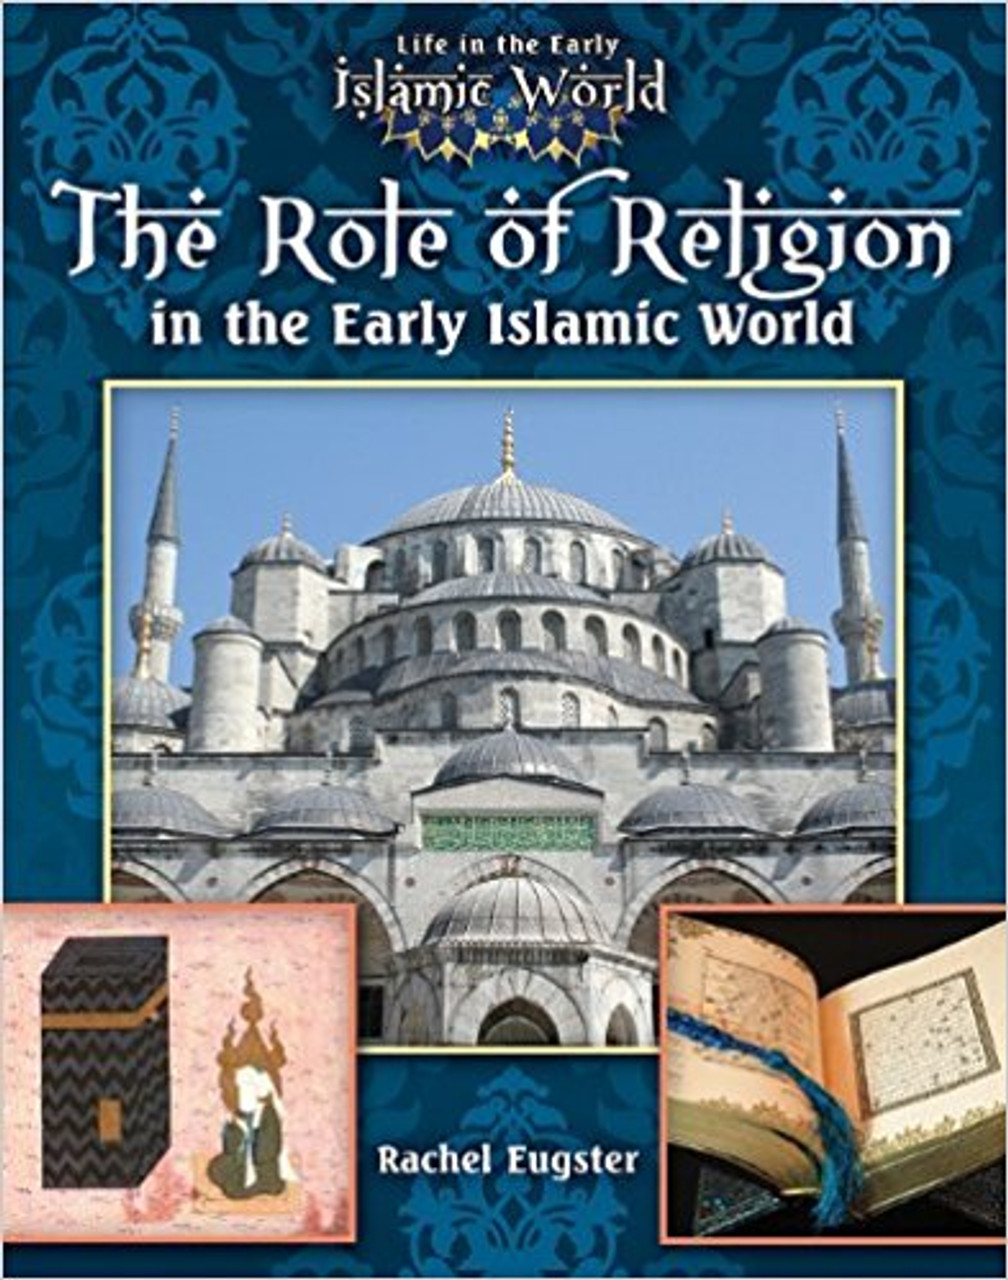 The Role of Religion in the Early Islamic World by Jim Whiting